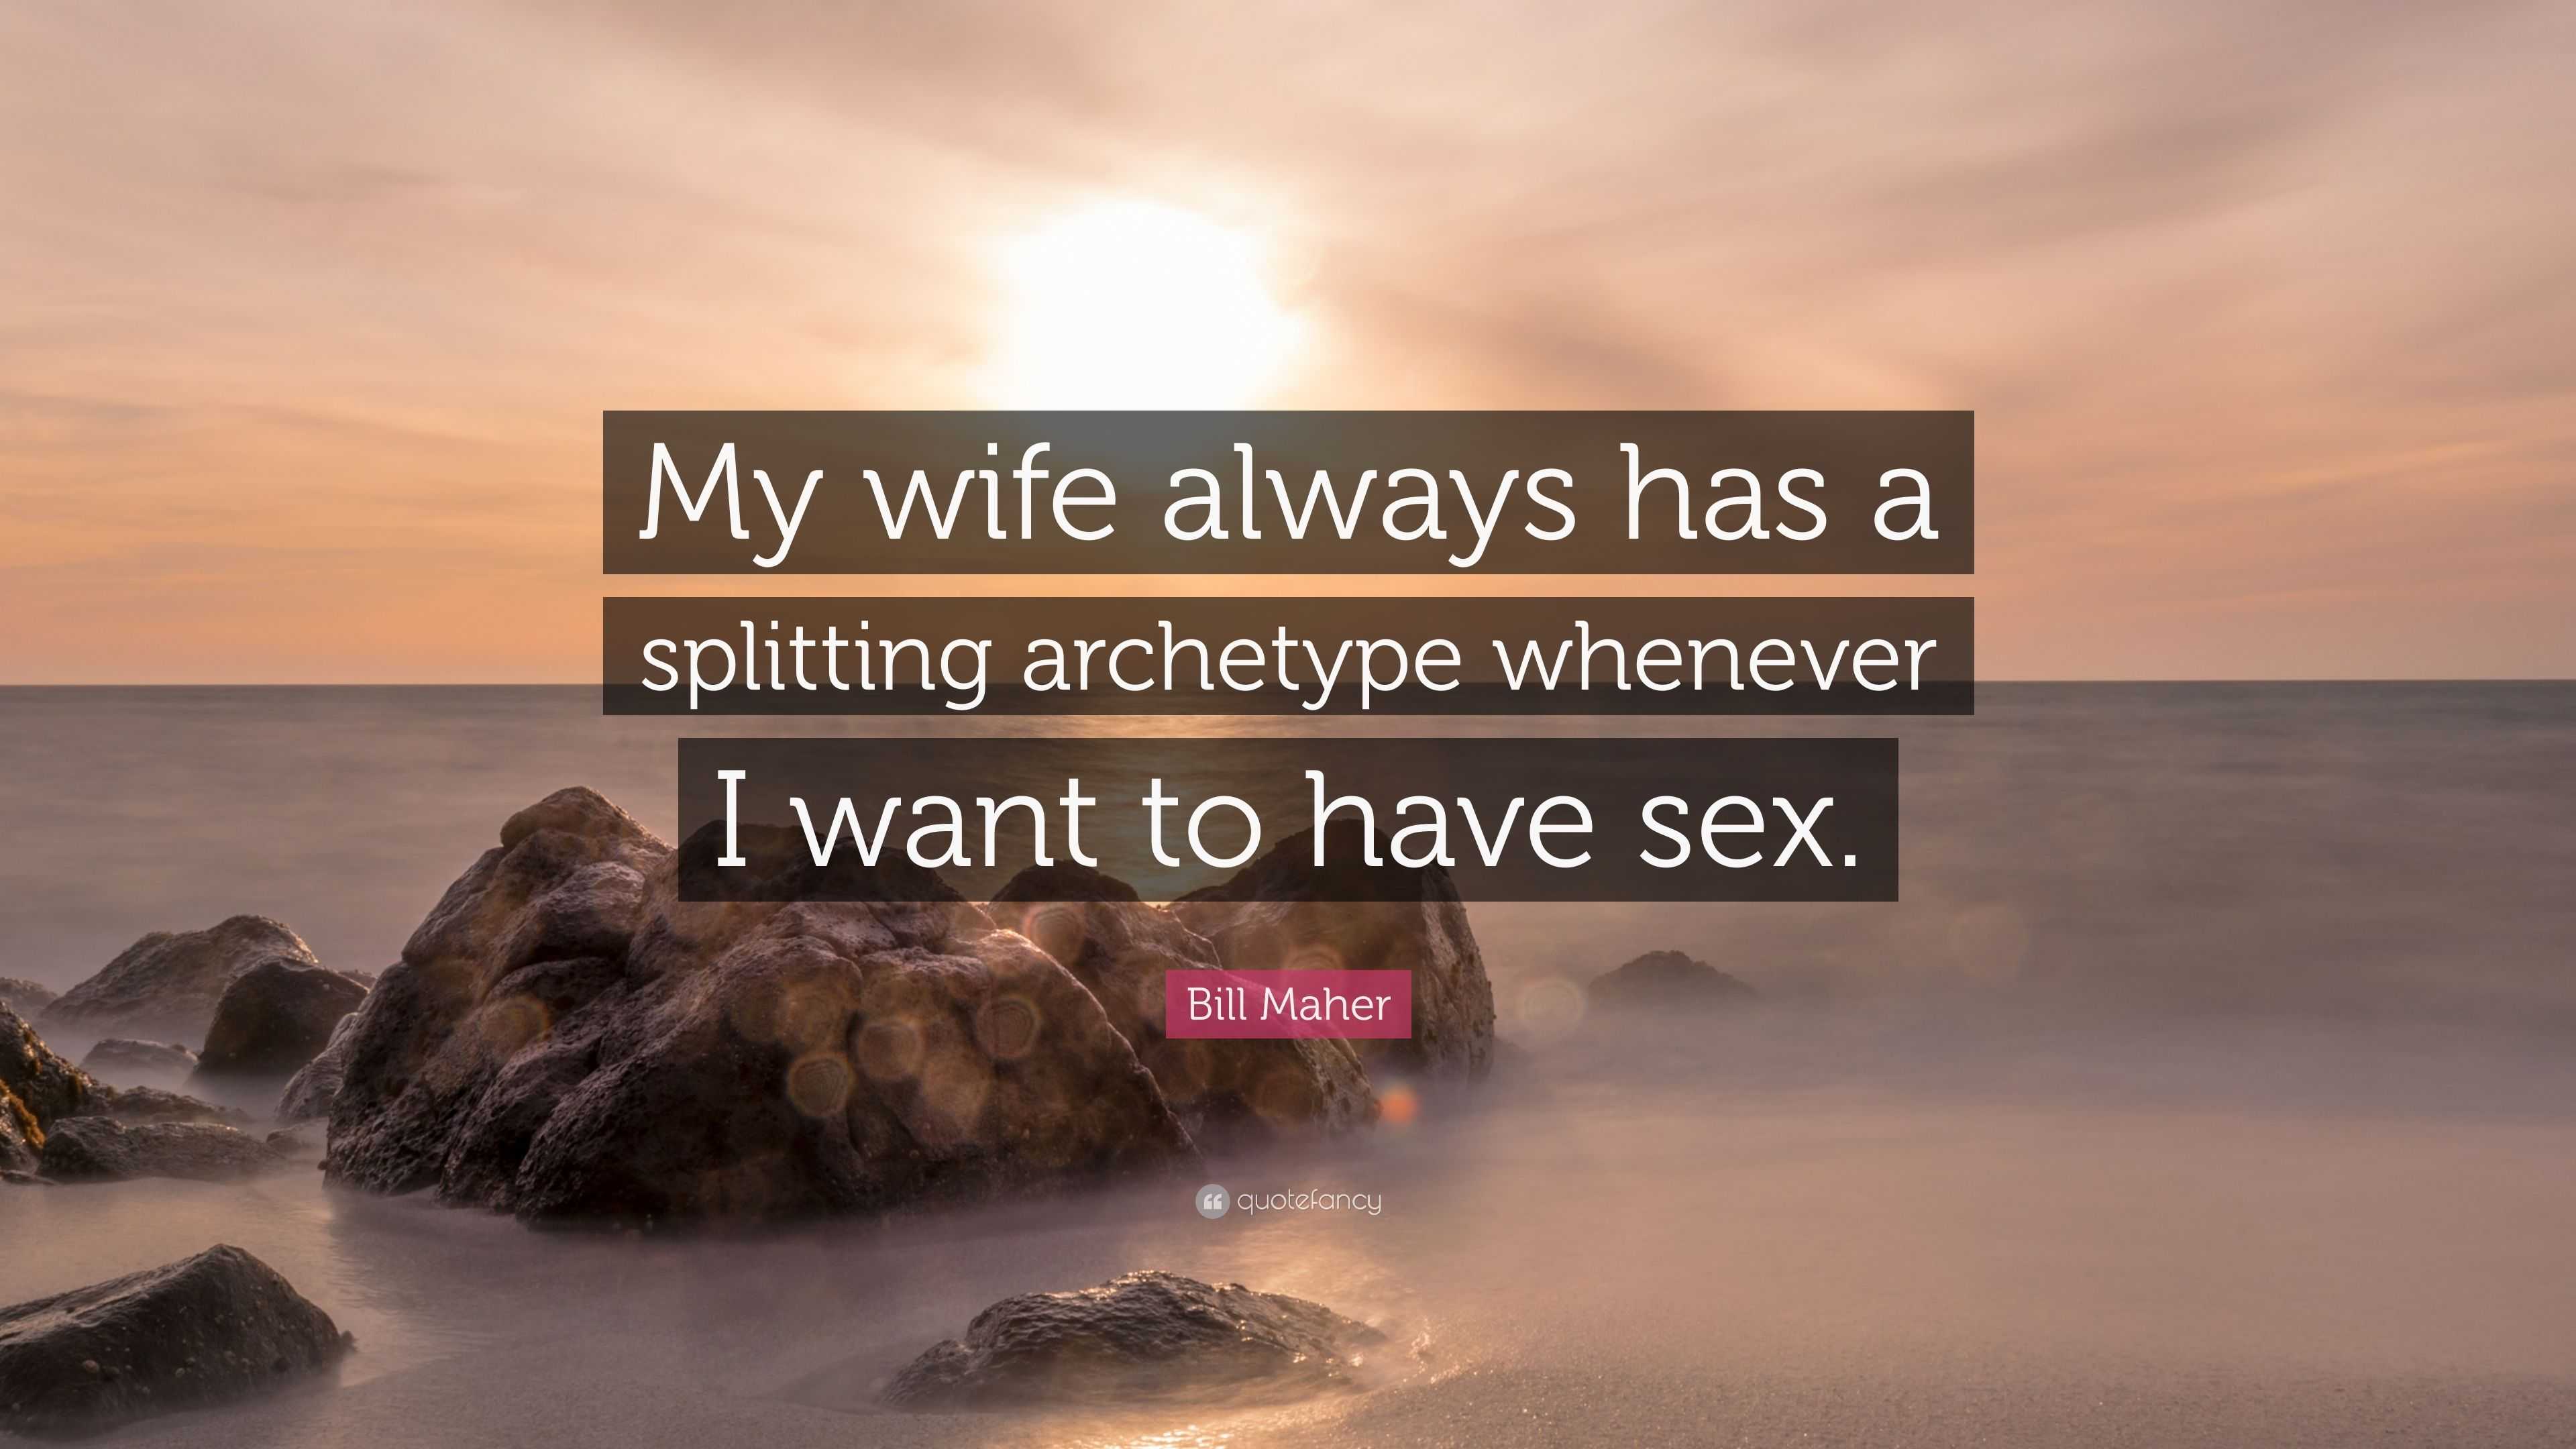 Bill Maher Quote “My wife always has a splitting archetype whenever I want to have sex.”